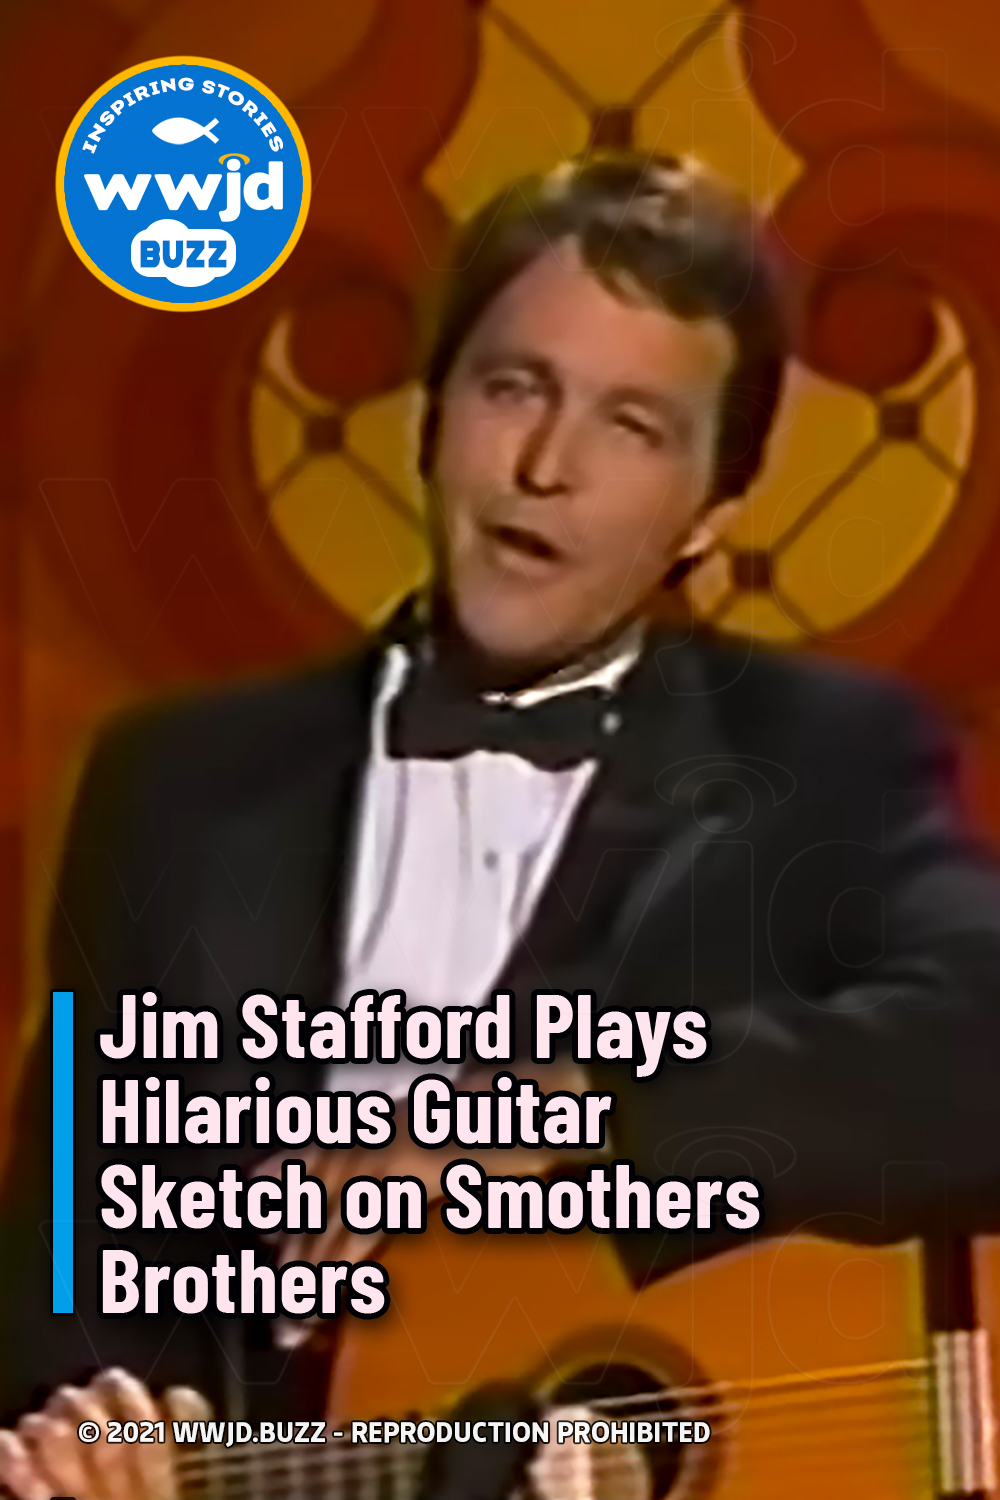 Jim Stafford Plays Hilarious Guitar Sketch on Smothers Brothers